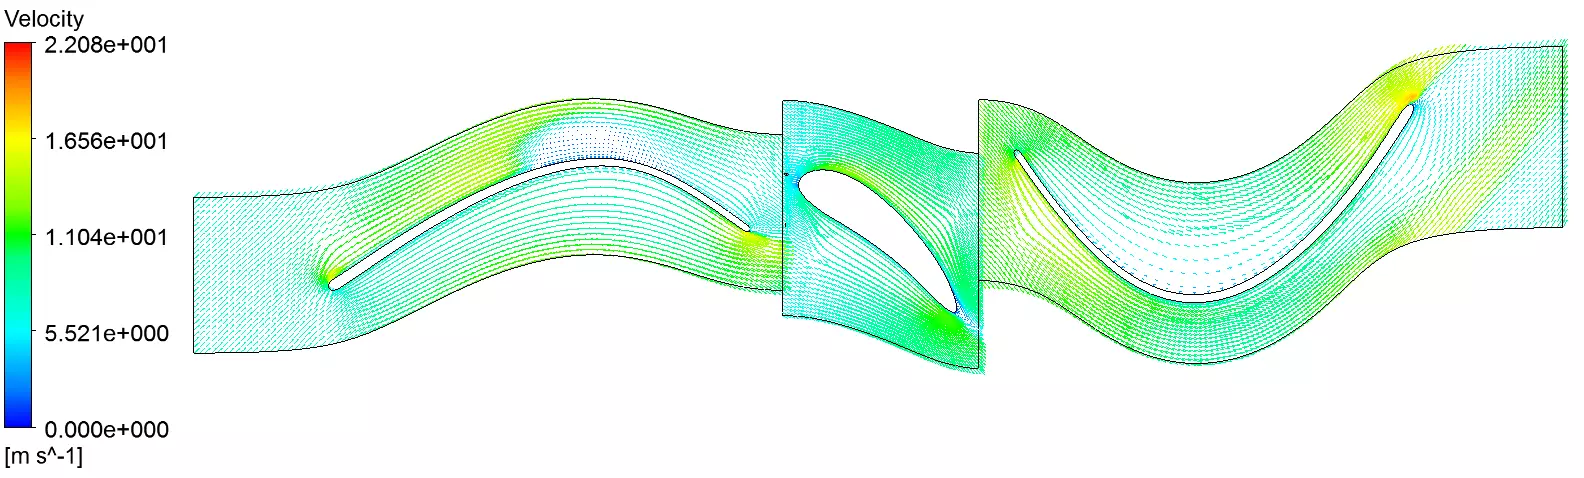 Velocity flow-field at midspan and 0.8 speed ratio